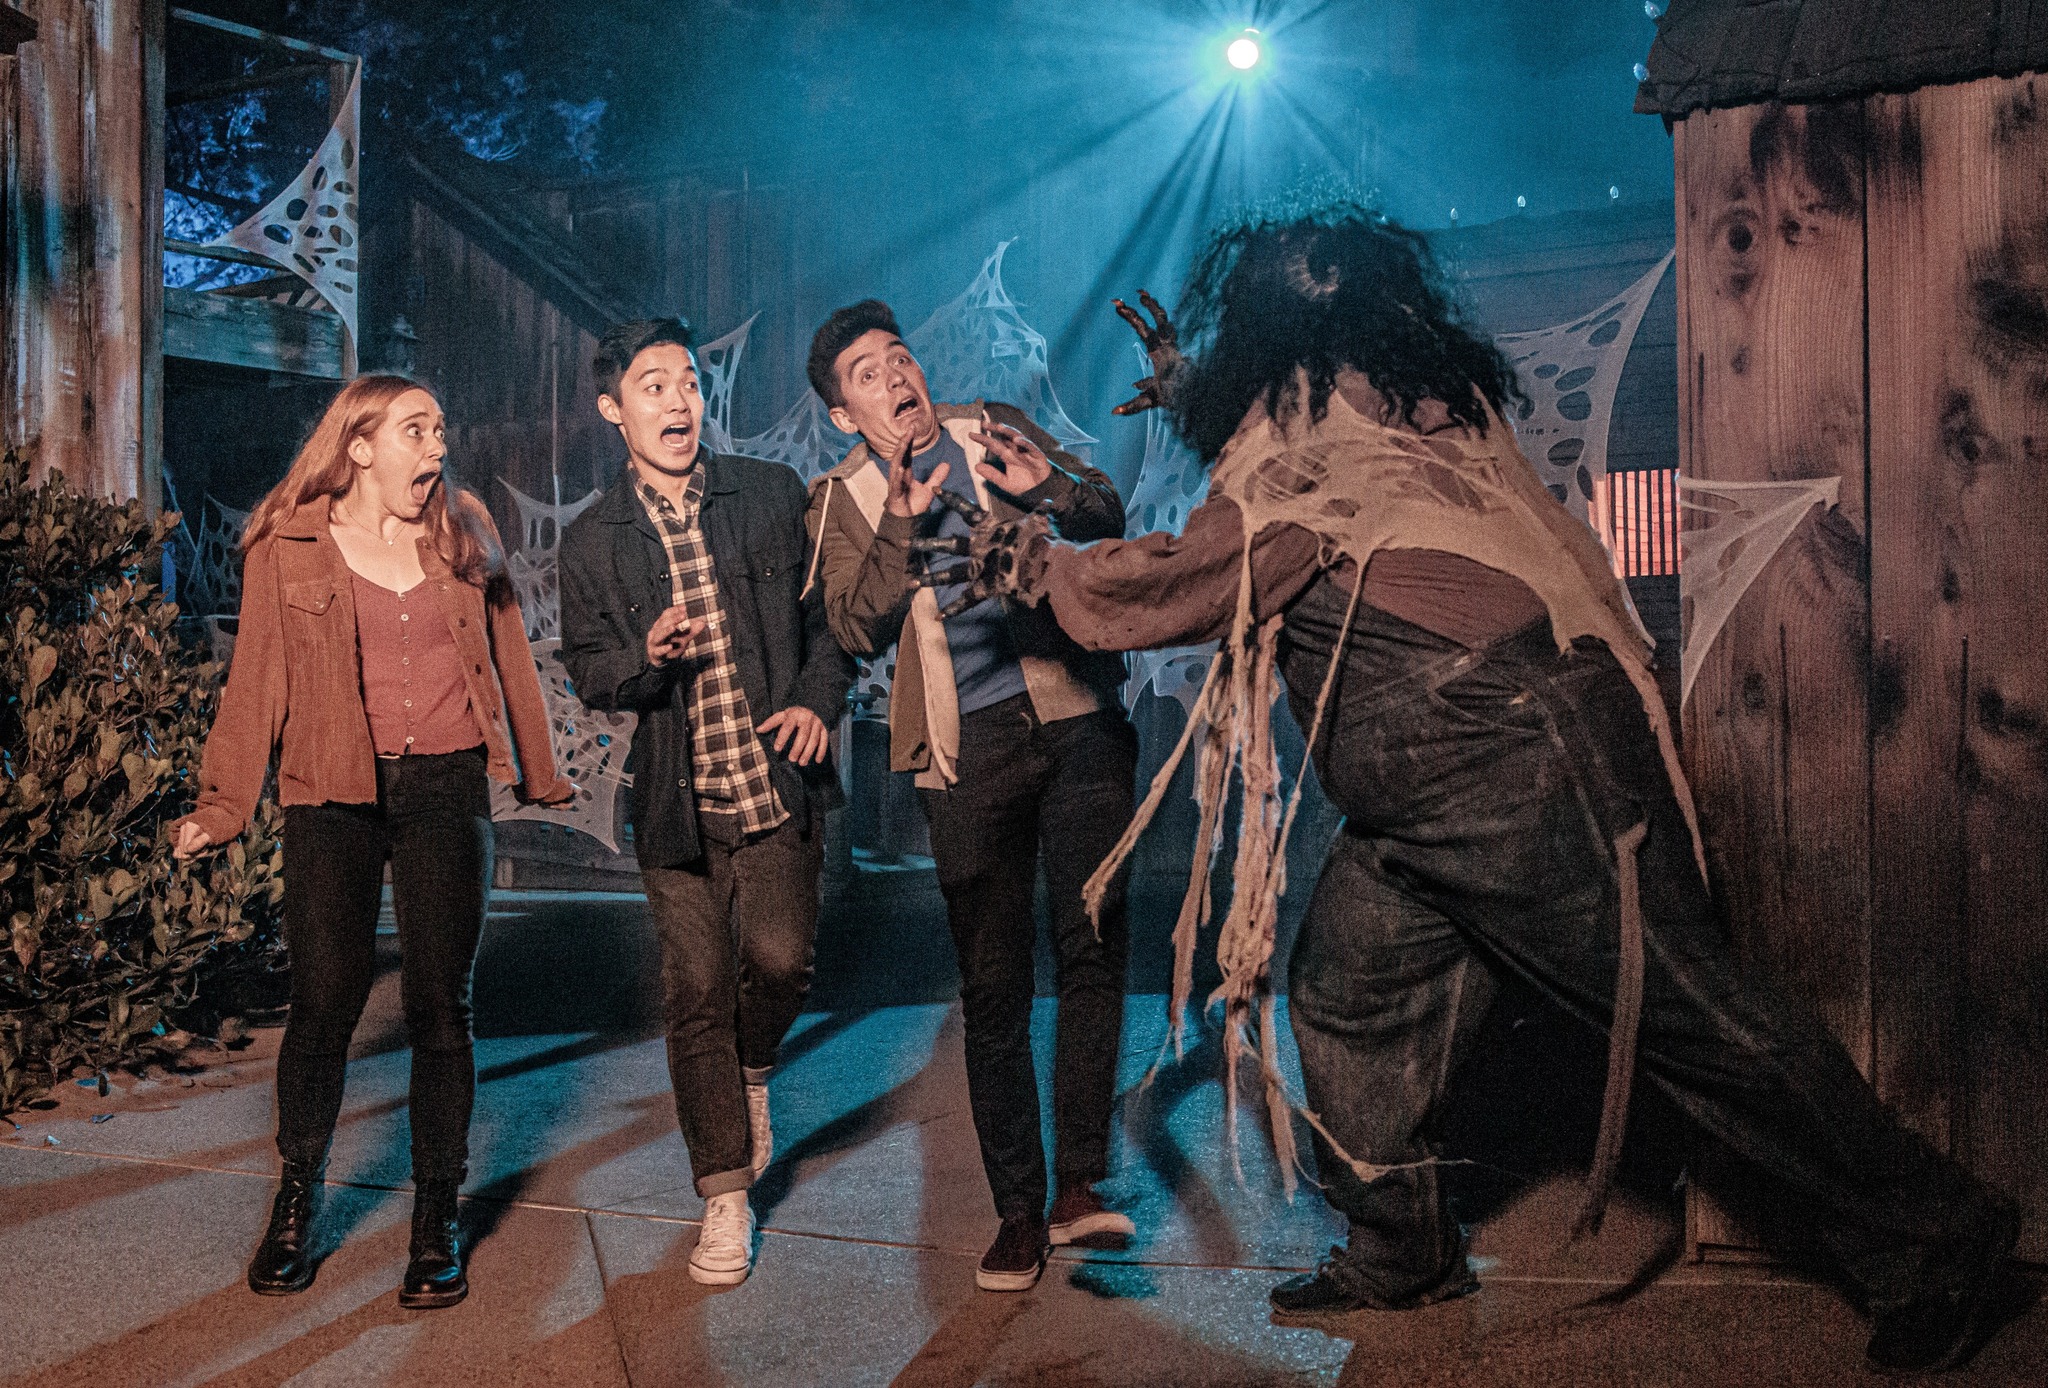 The Scare Zones are working at Knott's Scary Farm